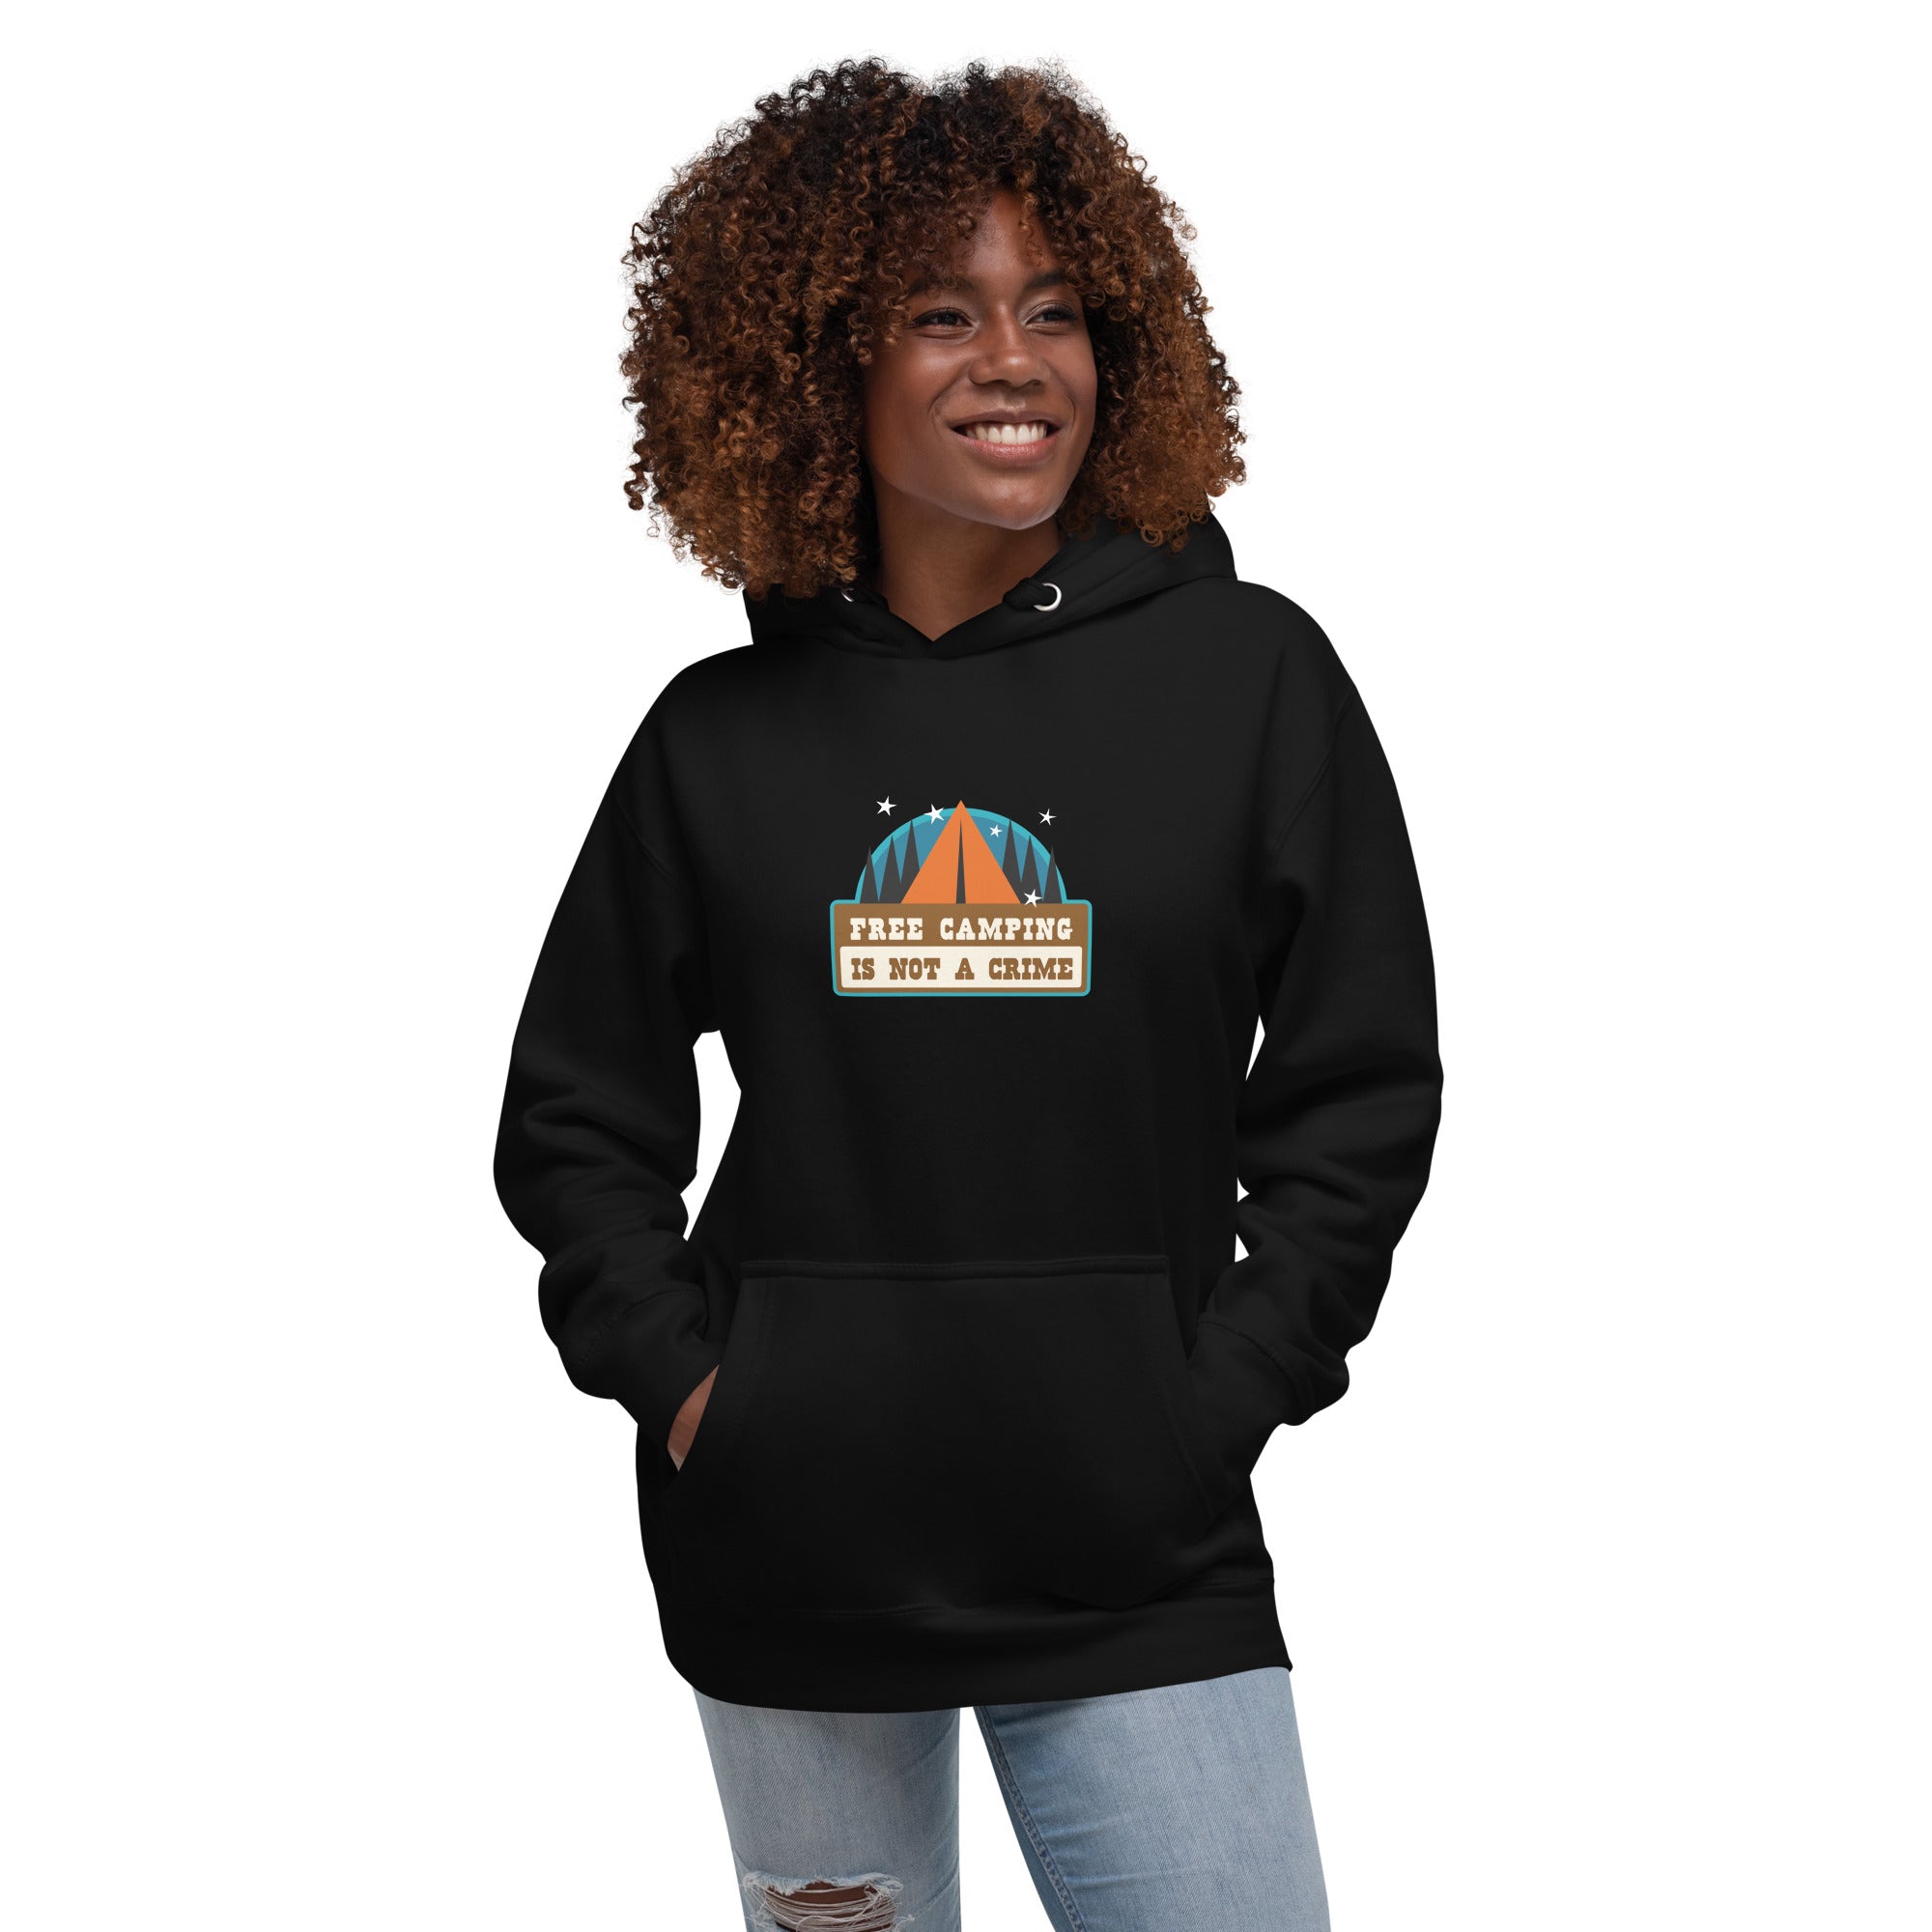 Unisex Cotton Hoodie Free camping is not a crime graphic